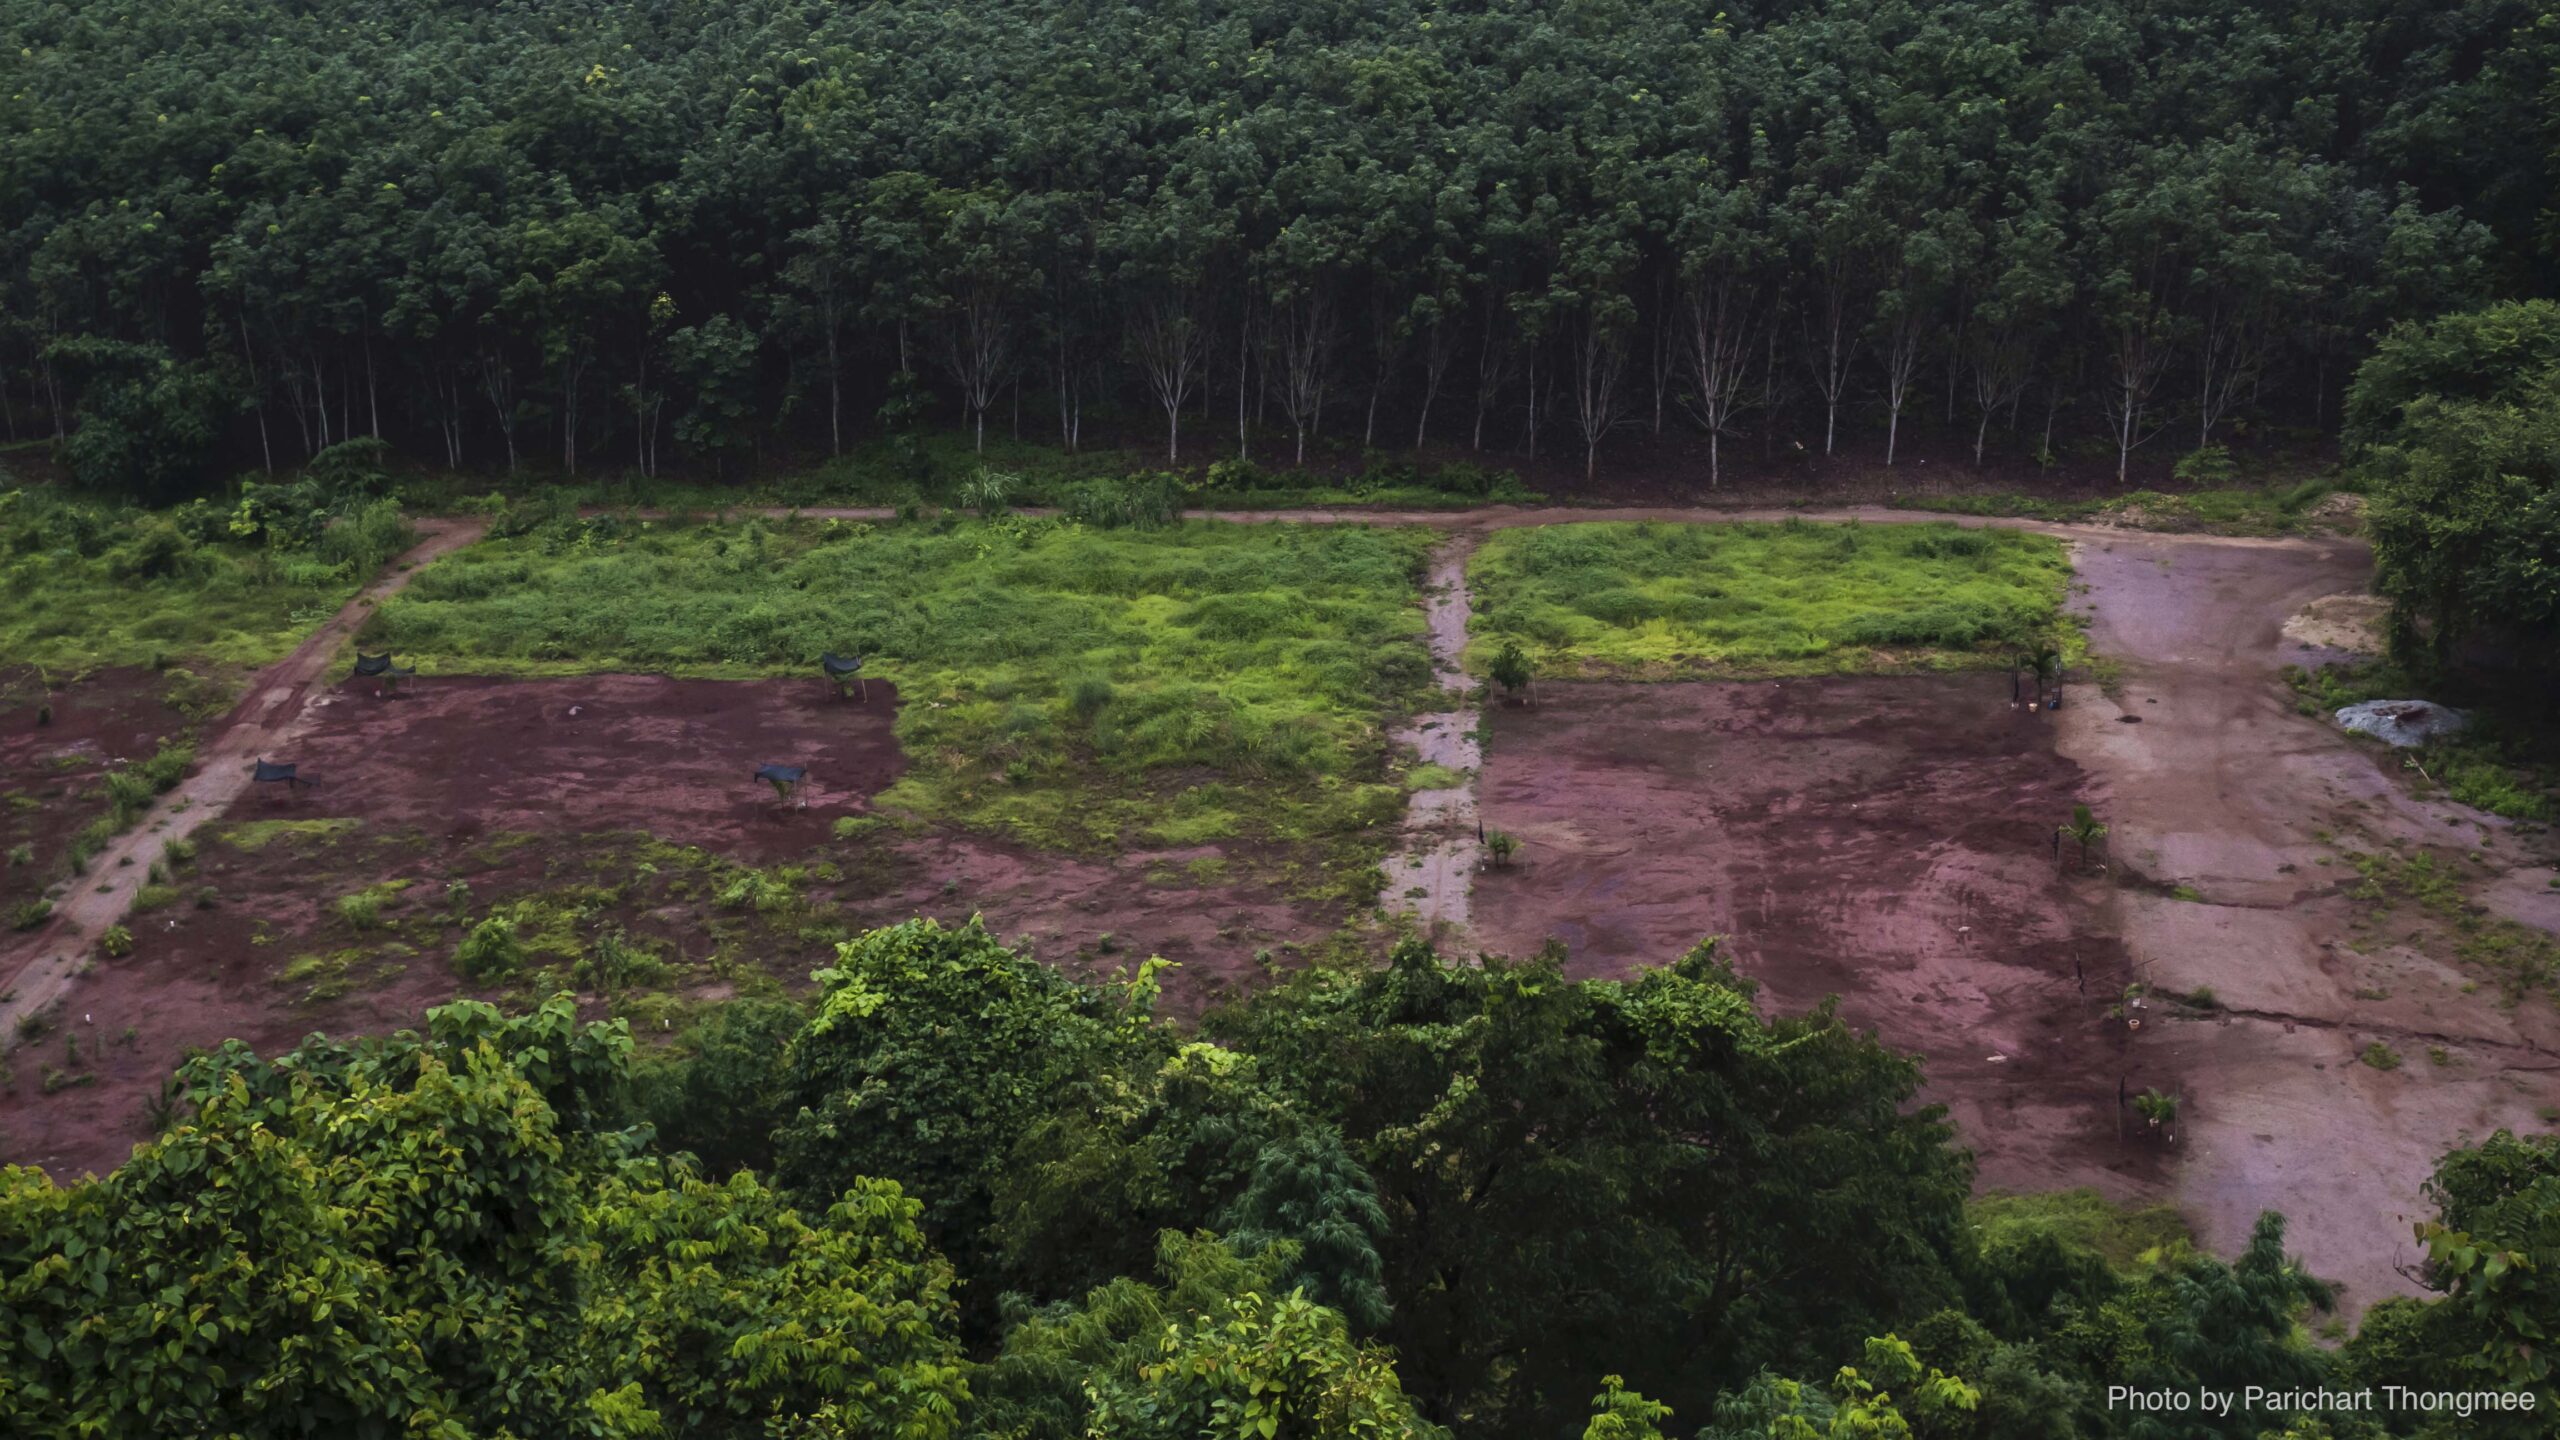 Deforestation: Scarred earth where tropical rain forest has been destroyed by human development